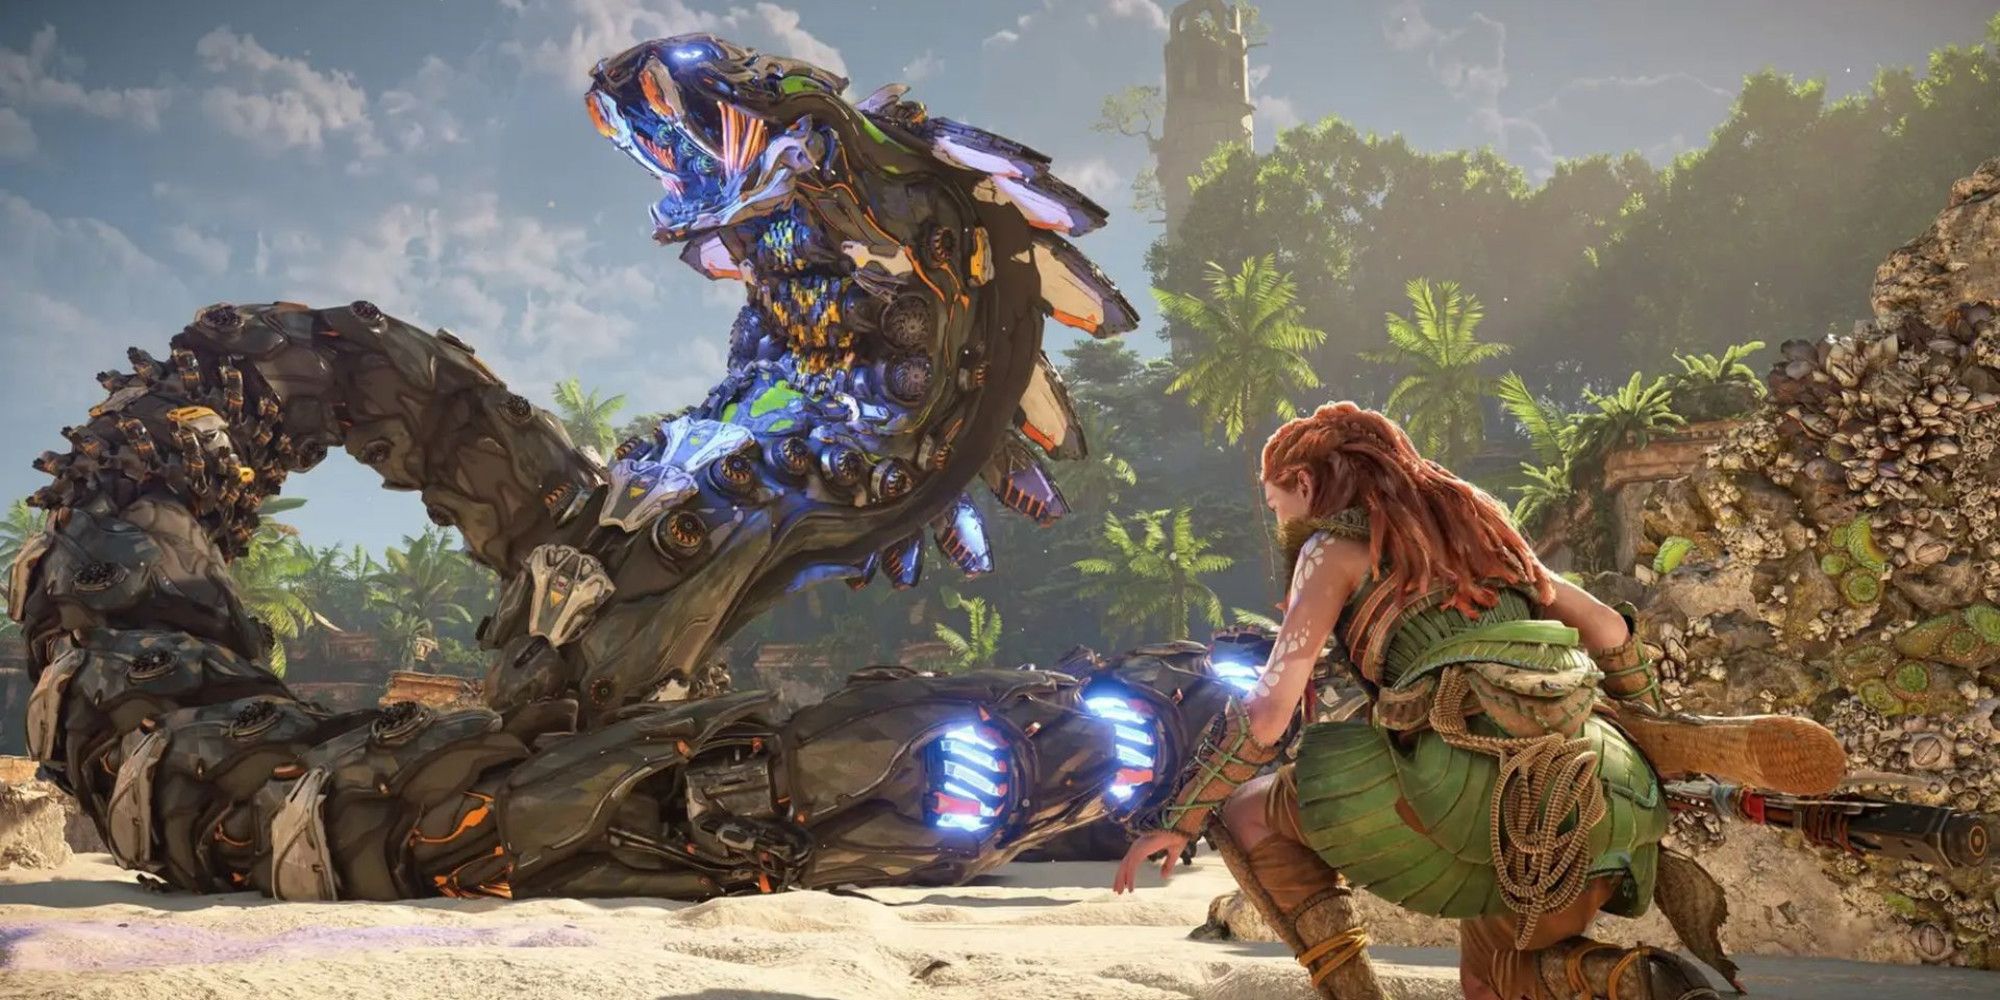 Aloy crouching before the Slitherfang in Horizon Forbidden West.